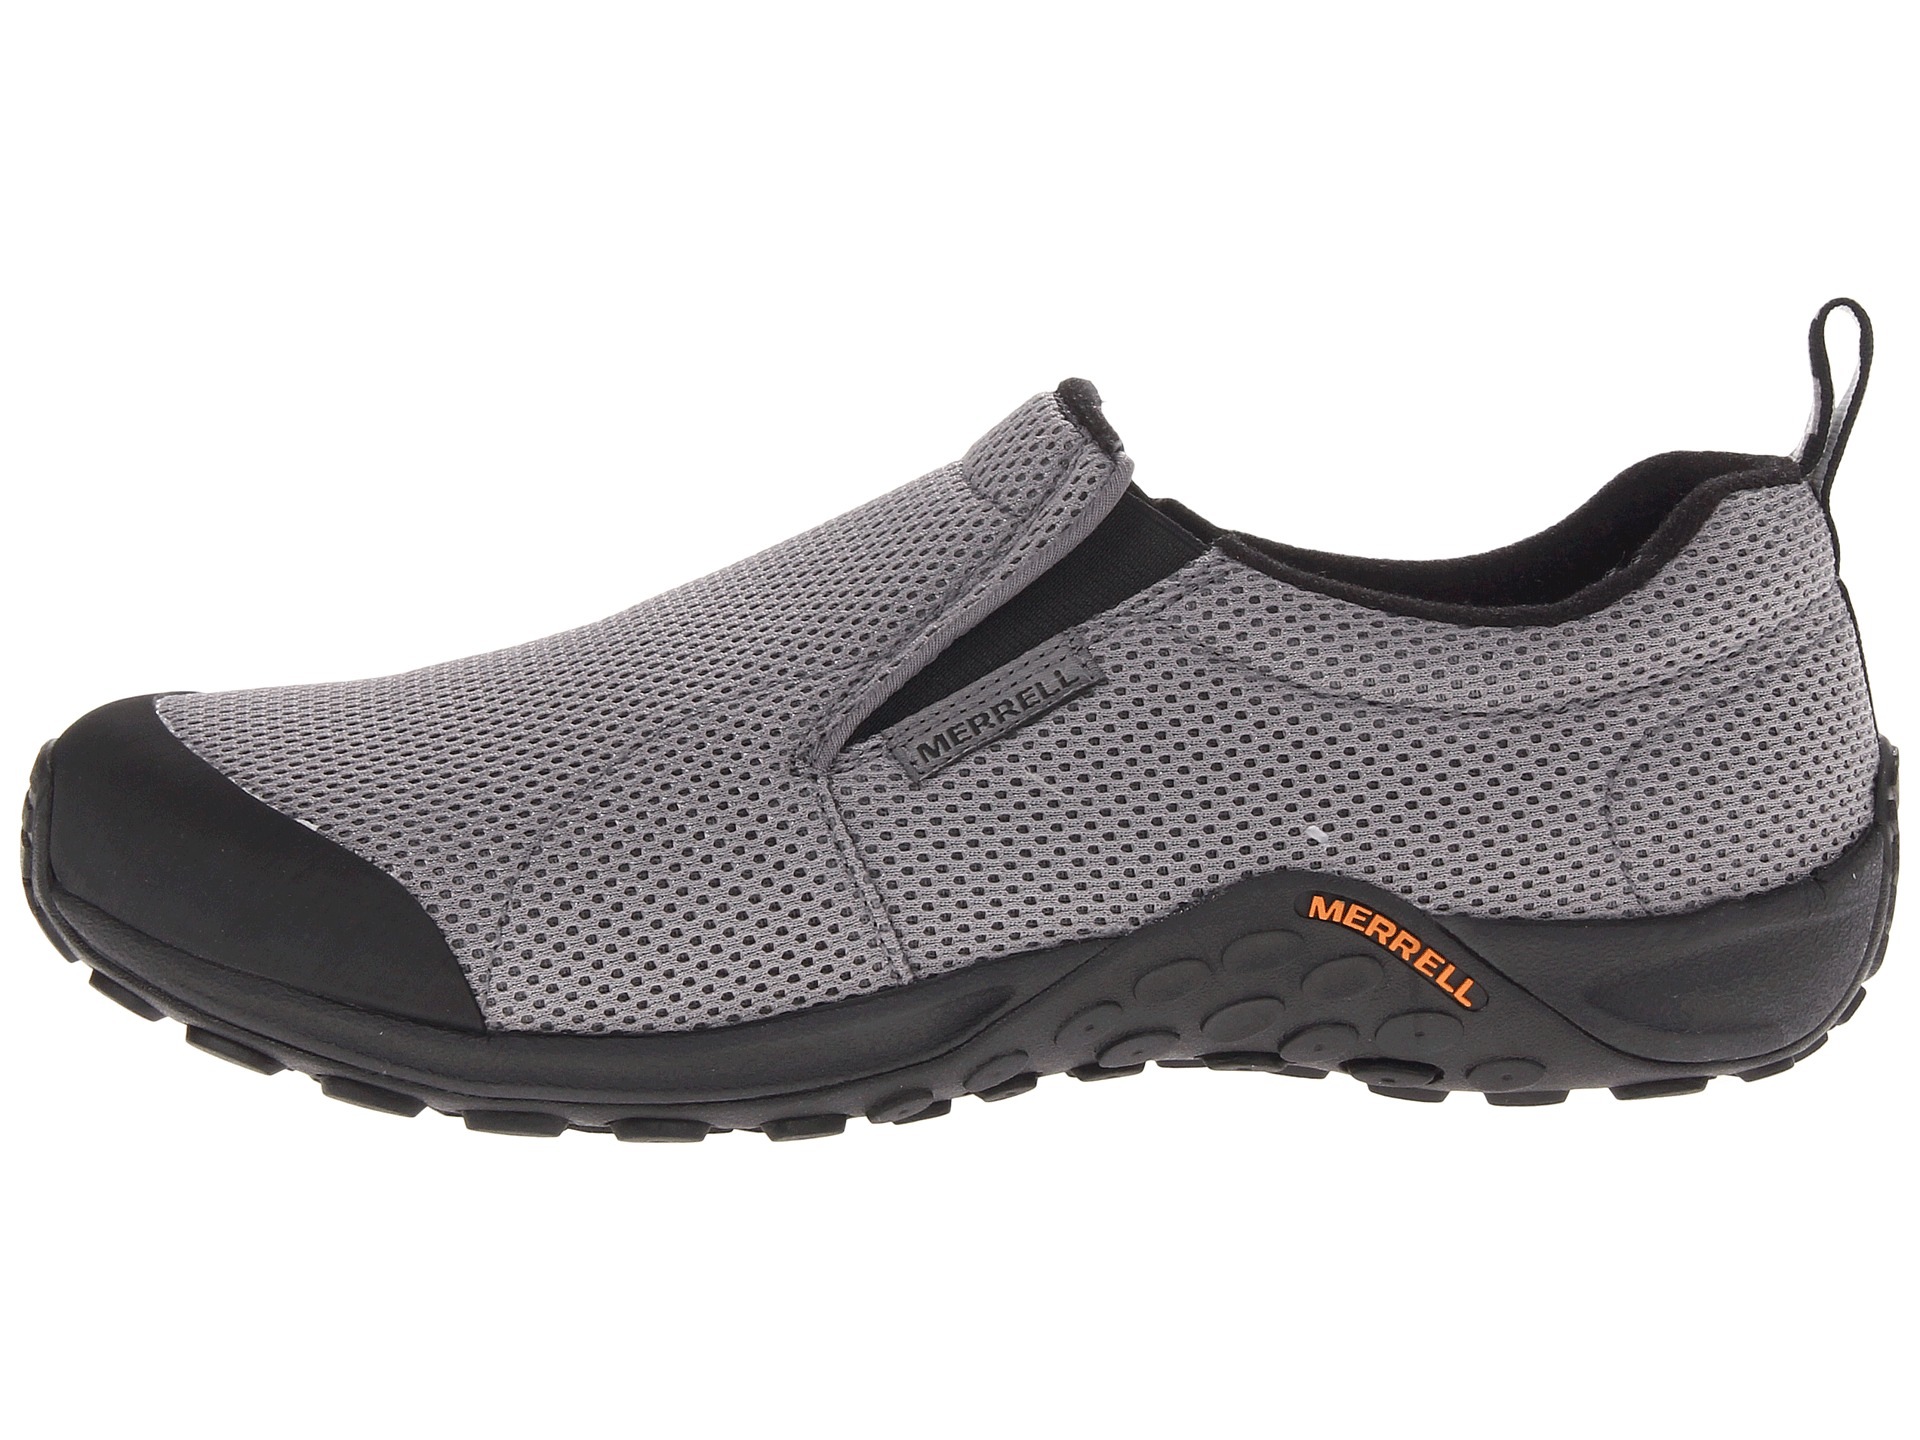 Merrell Jungle Moc Touch Breeze - Zappos.com Free Shipping BOTH Ways